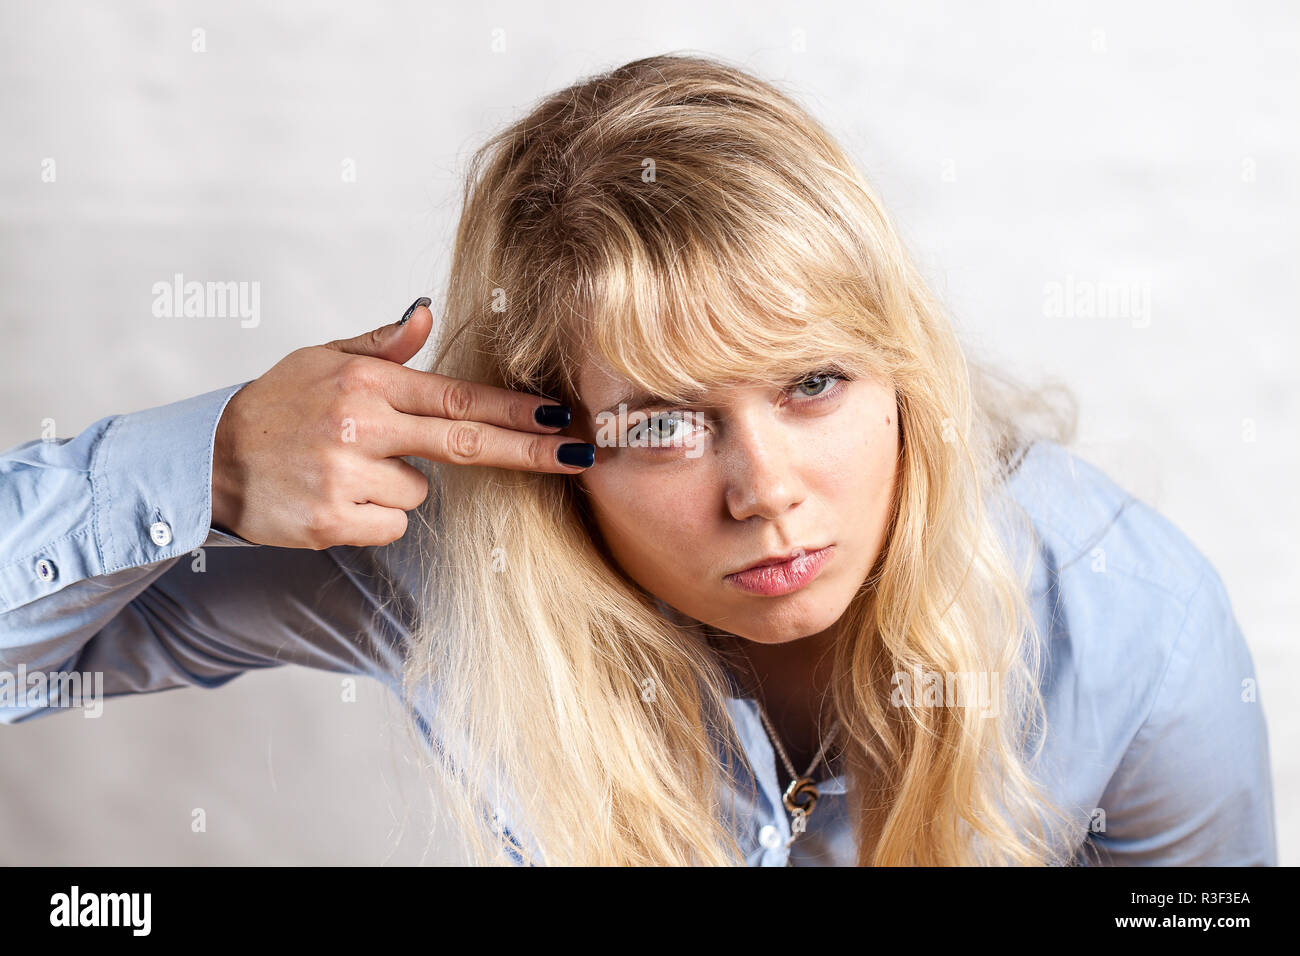 guggst you ?? Stock Photo